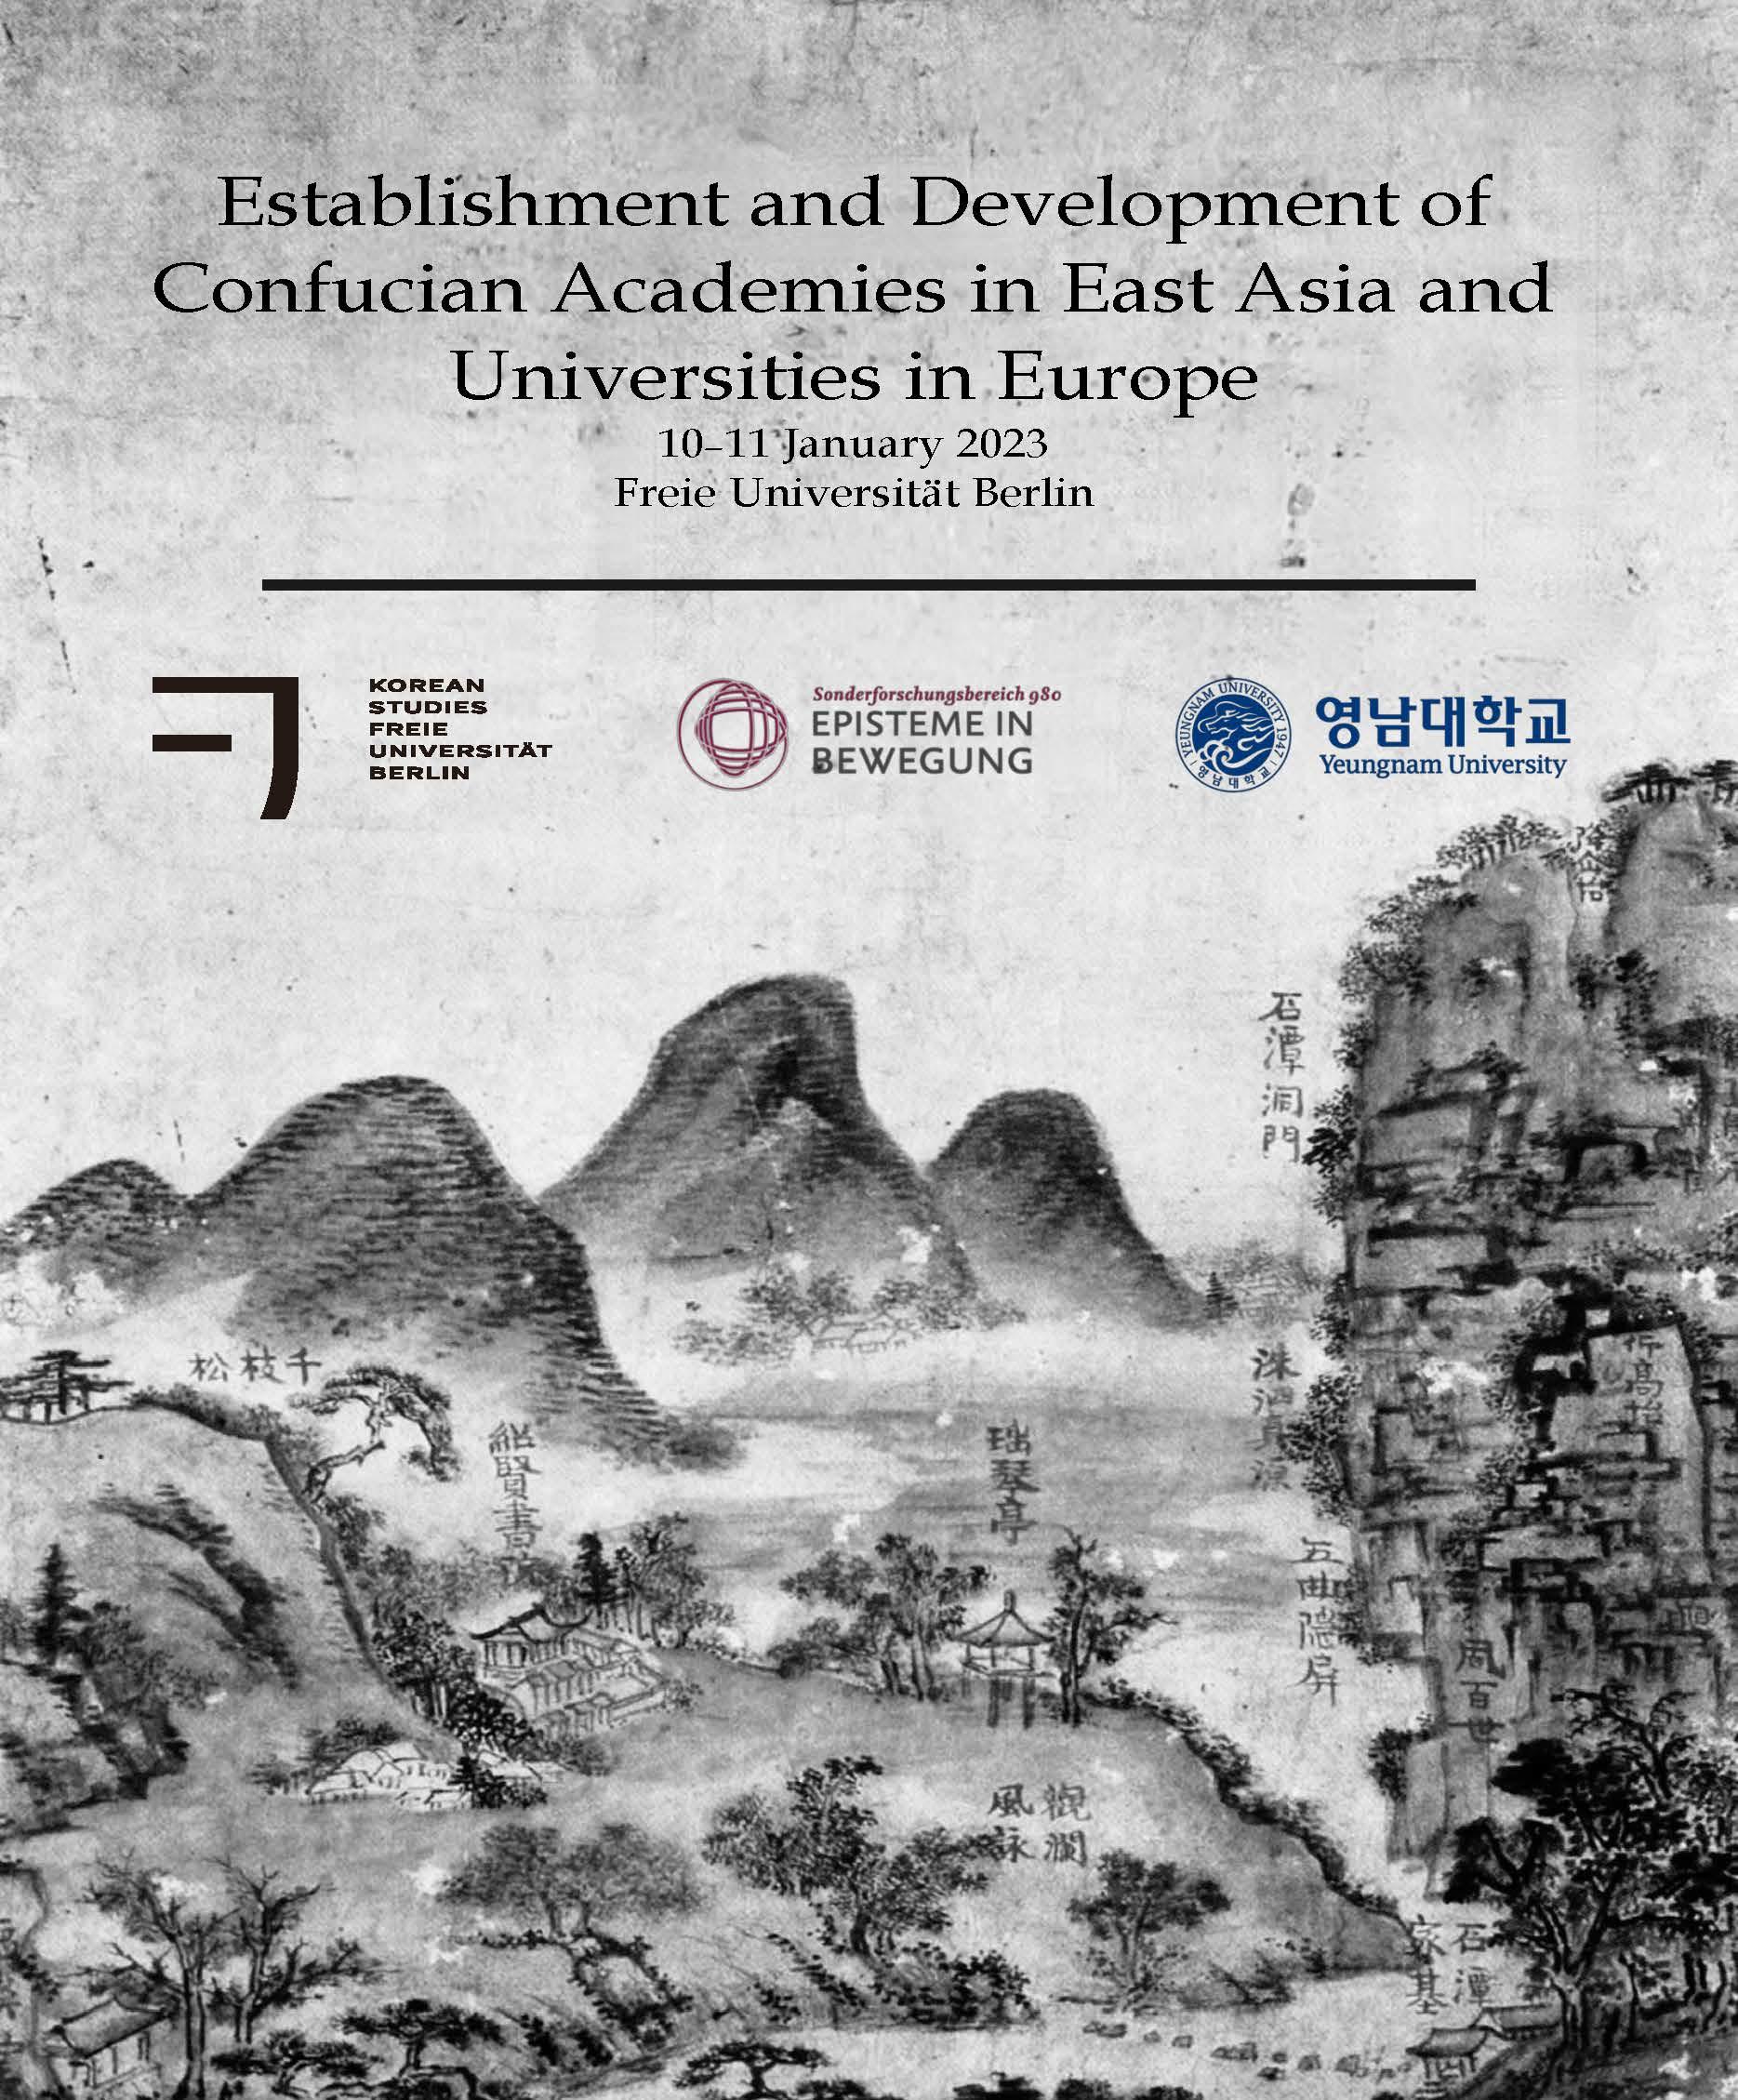 Establishment and Development of Confucian Academies in East Asia and Universities in Europe